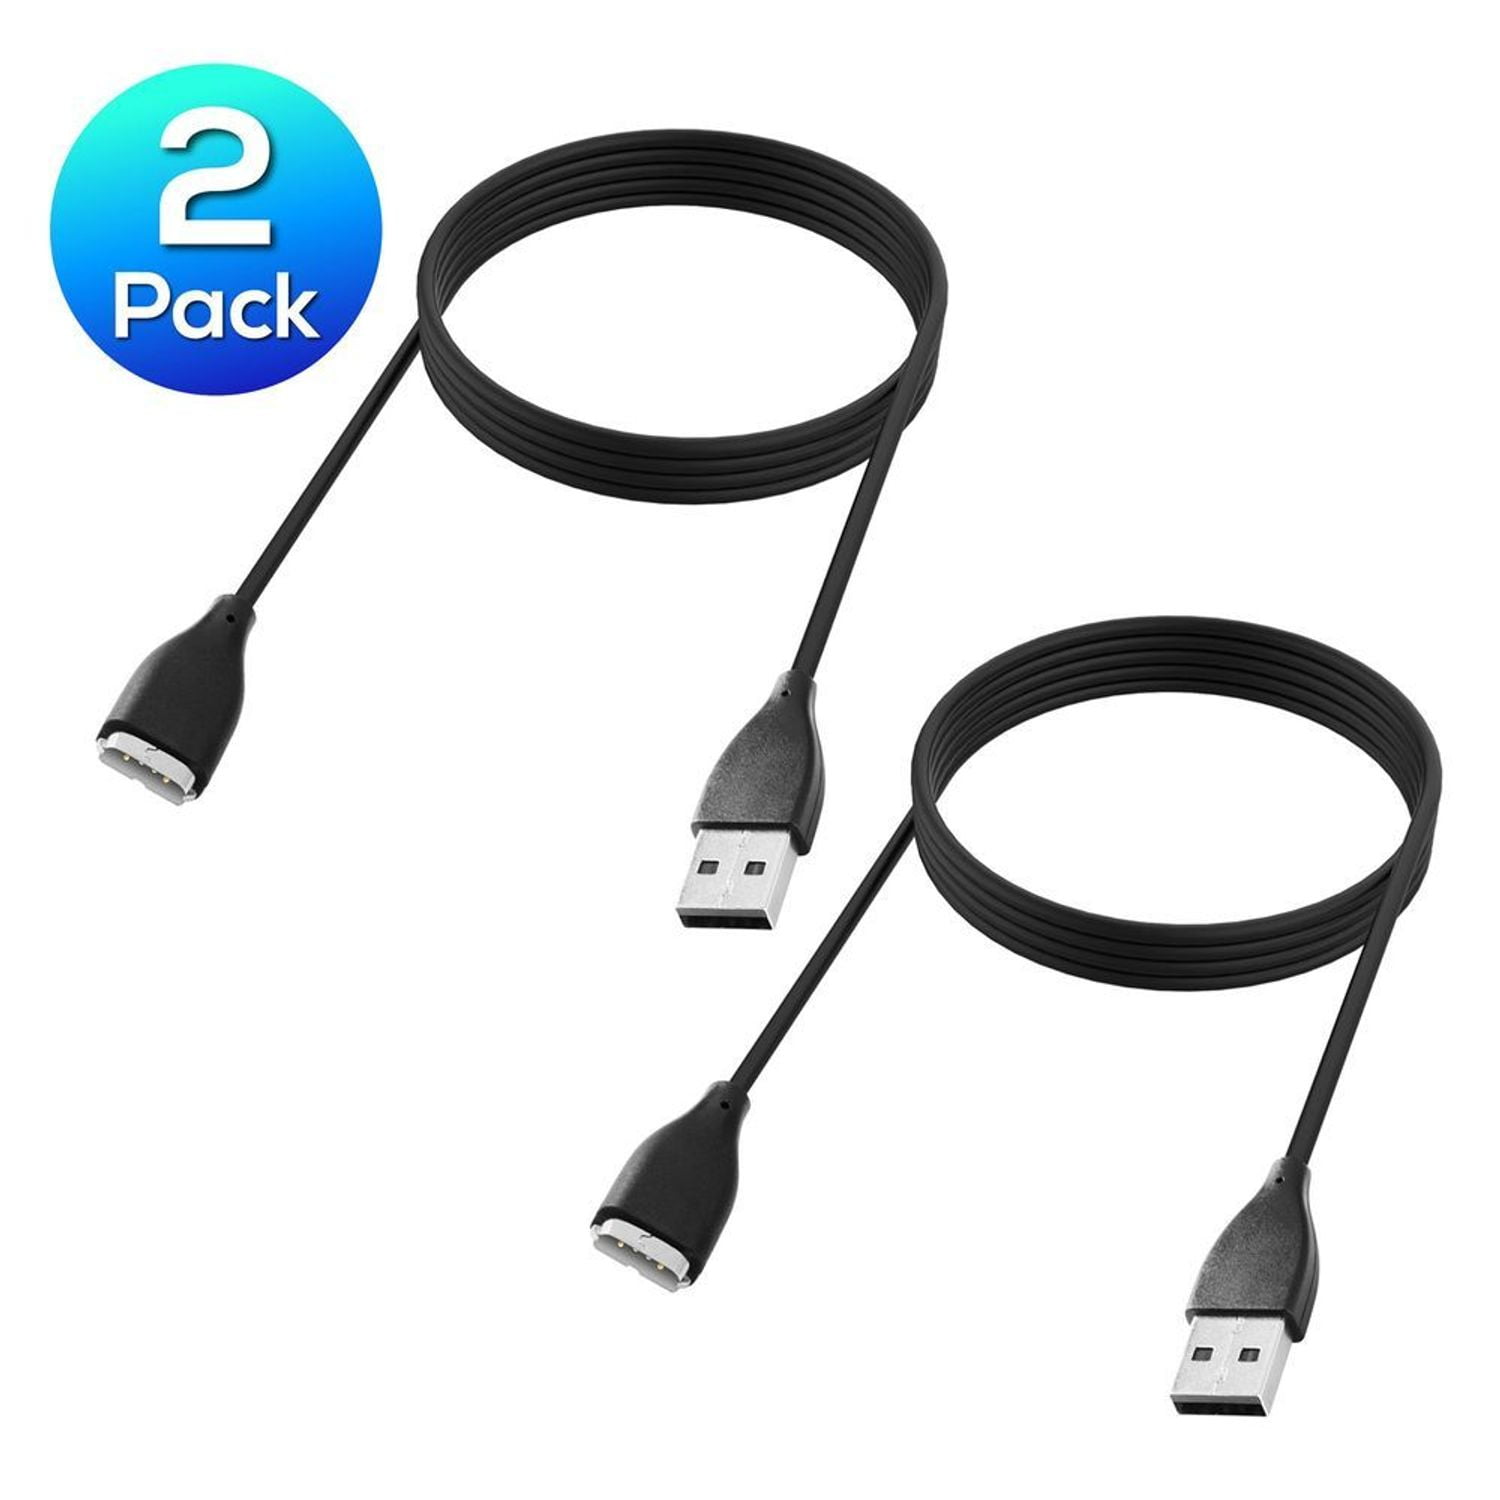 Fitbit Surge Charger Cable (2 pack), by 